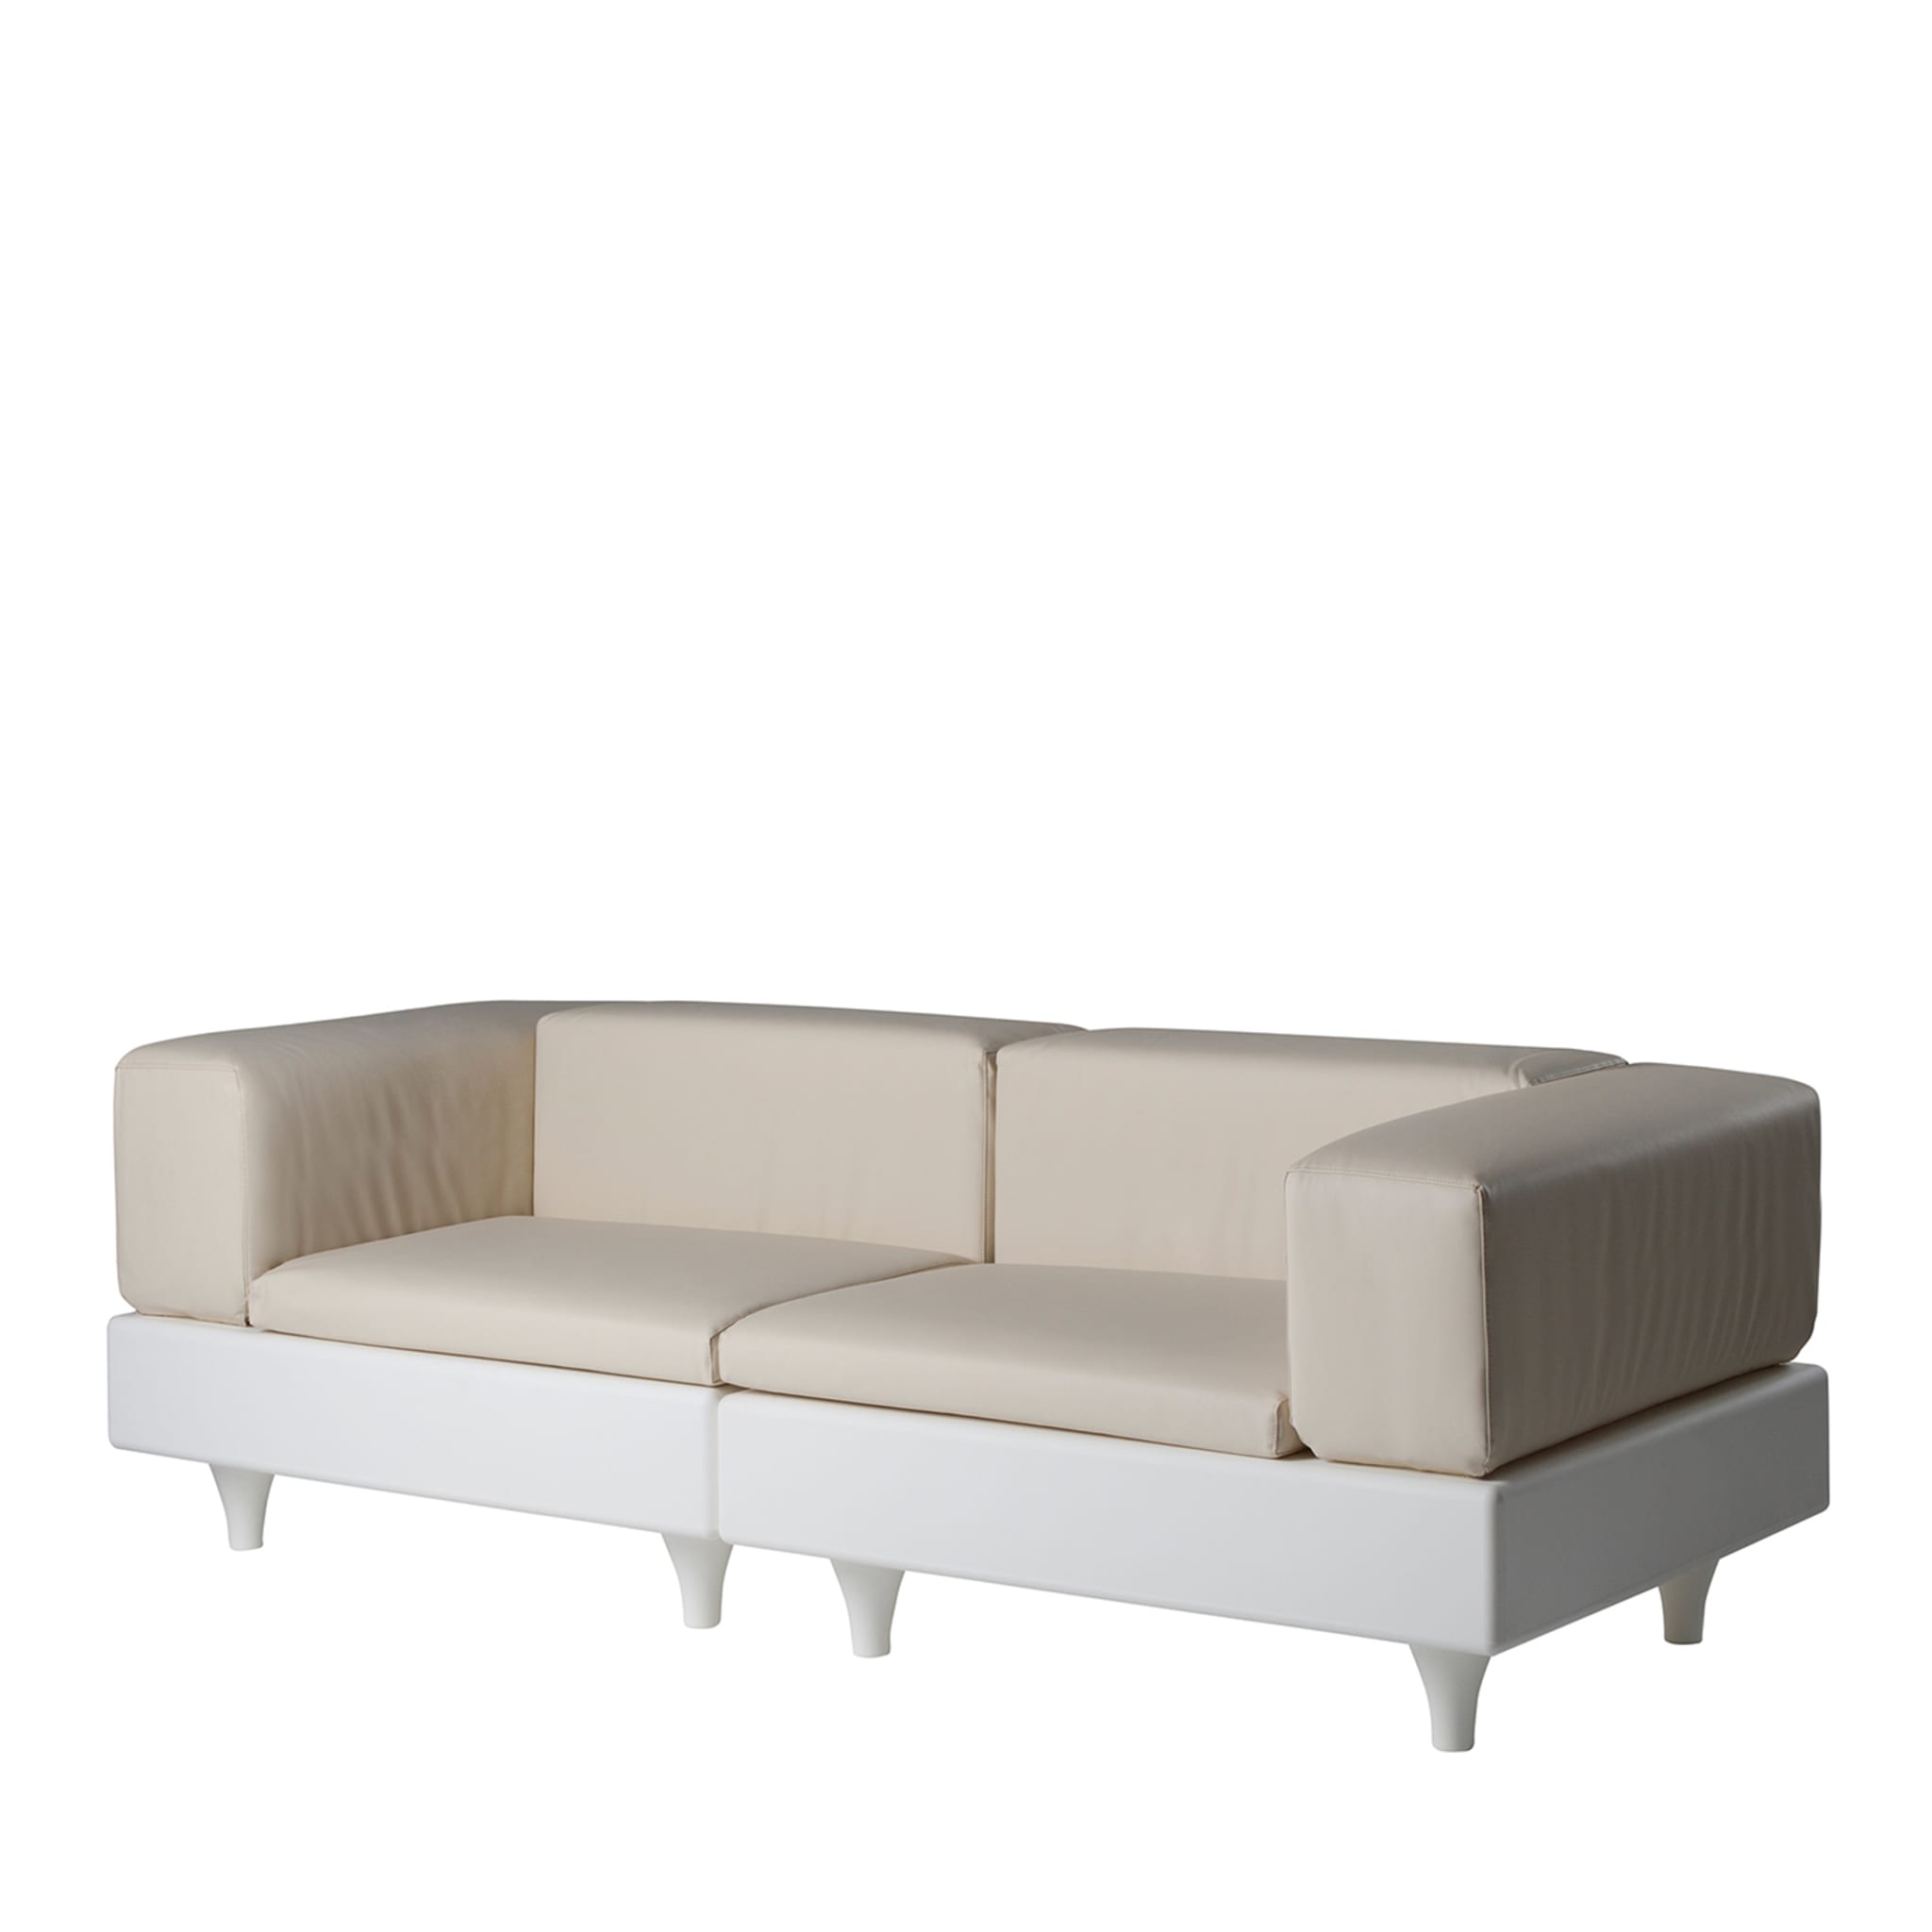 Happylife 2-Seater White and Beige Sofa - Main view